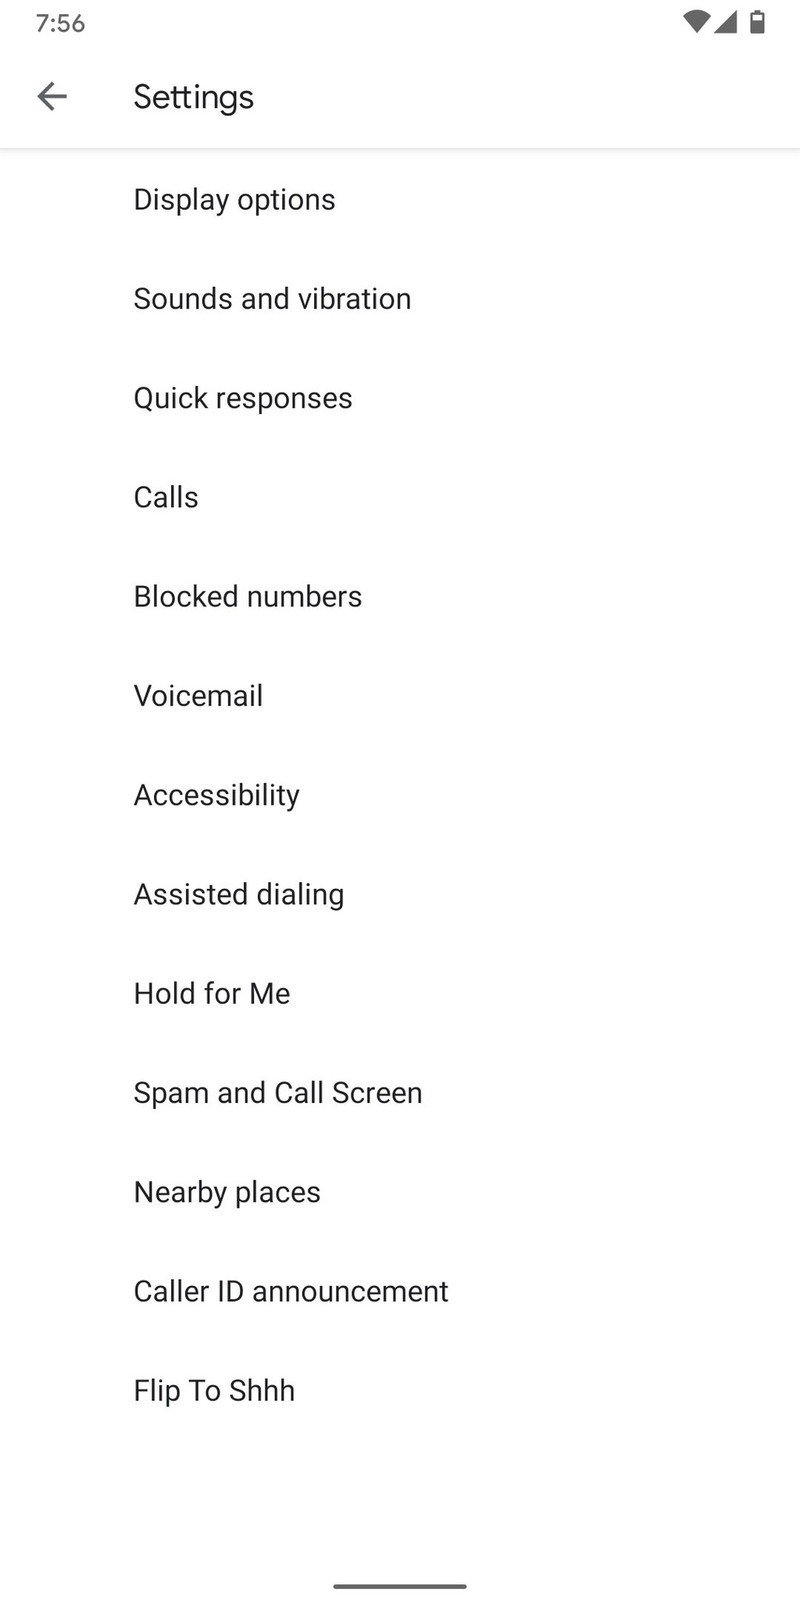 How To Call Screen Ss